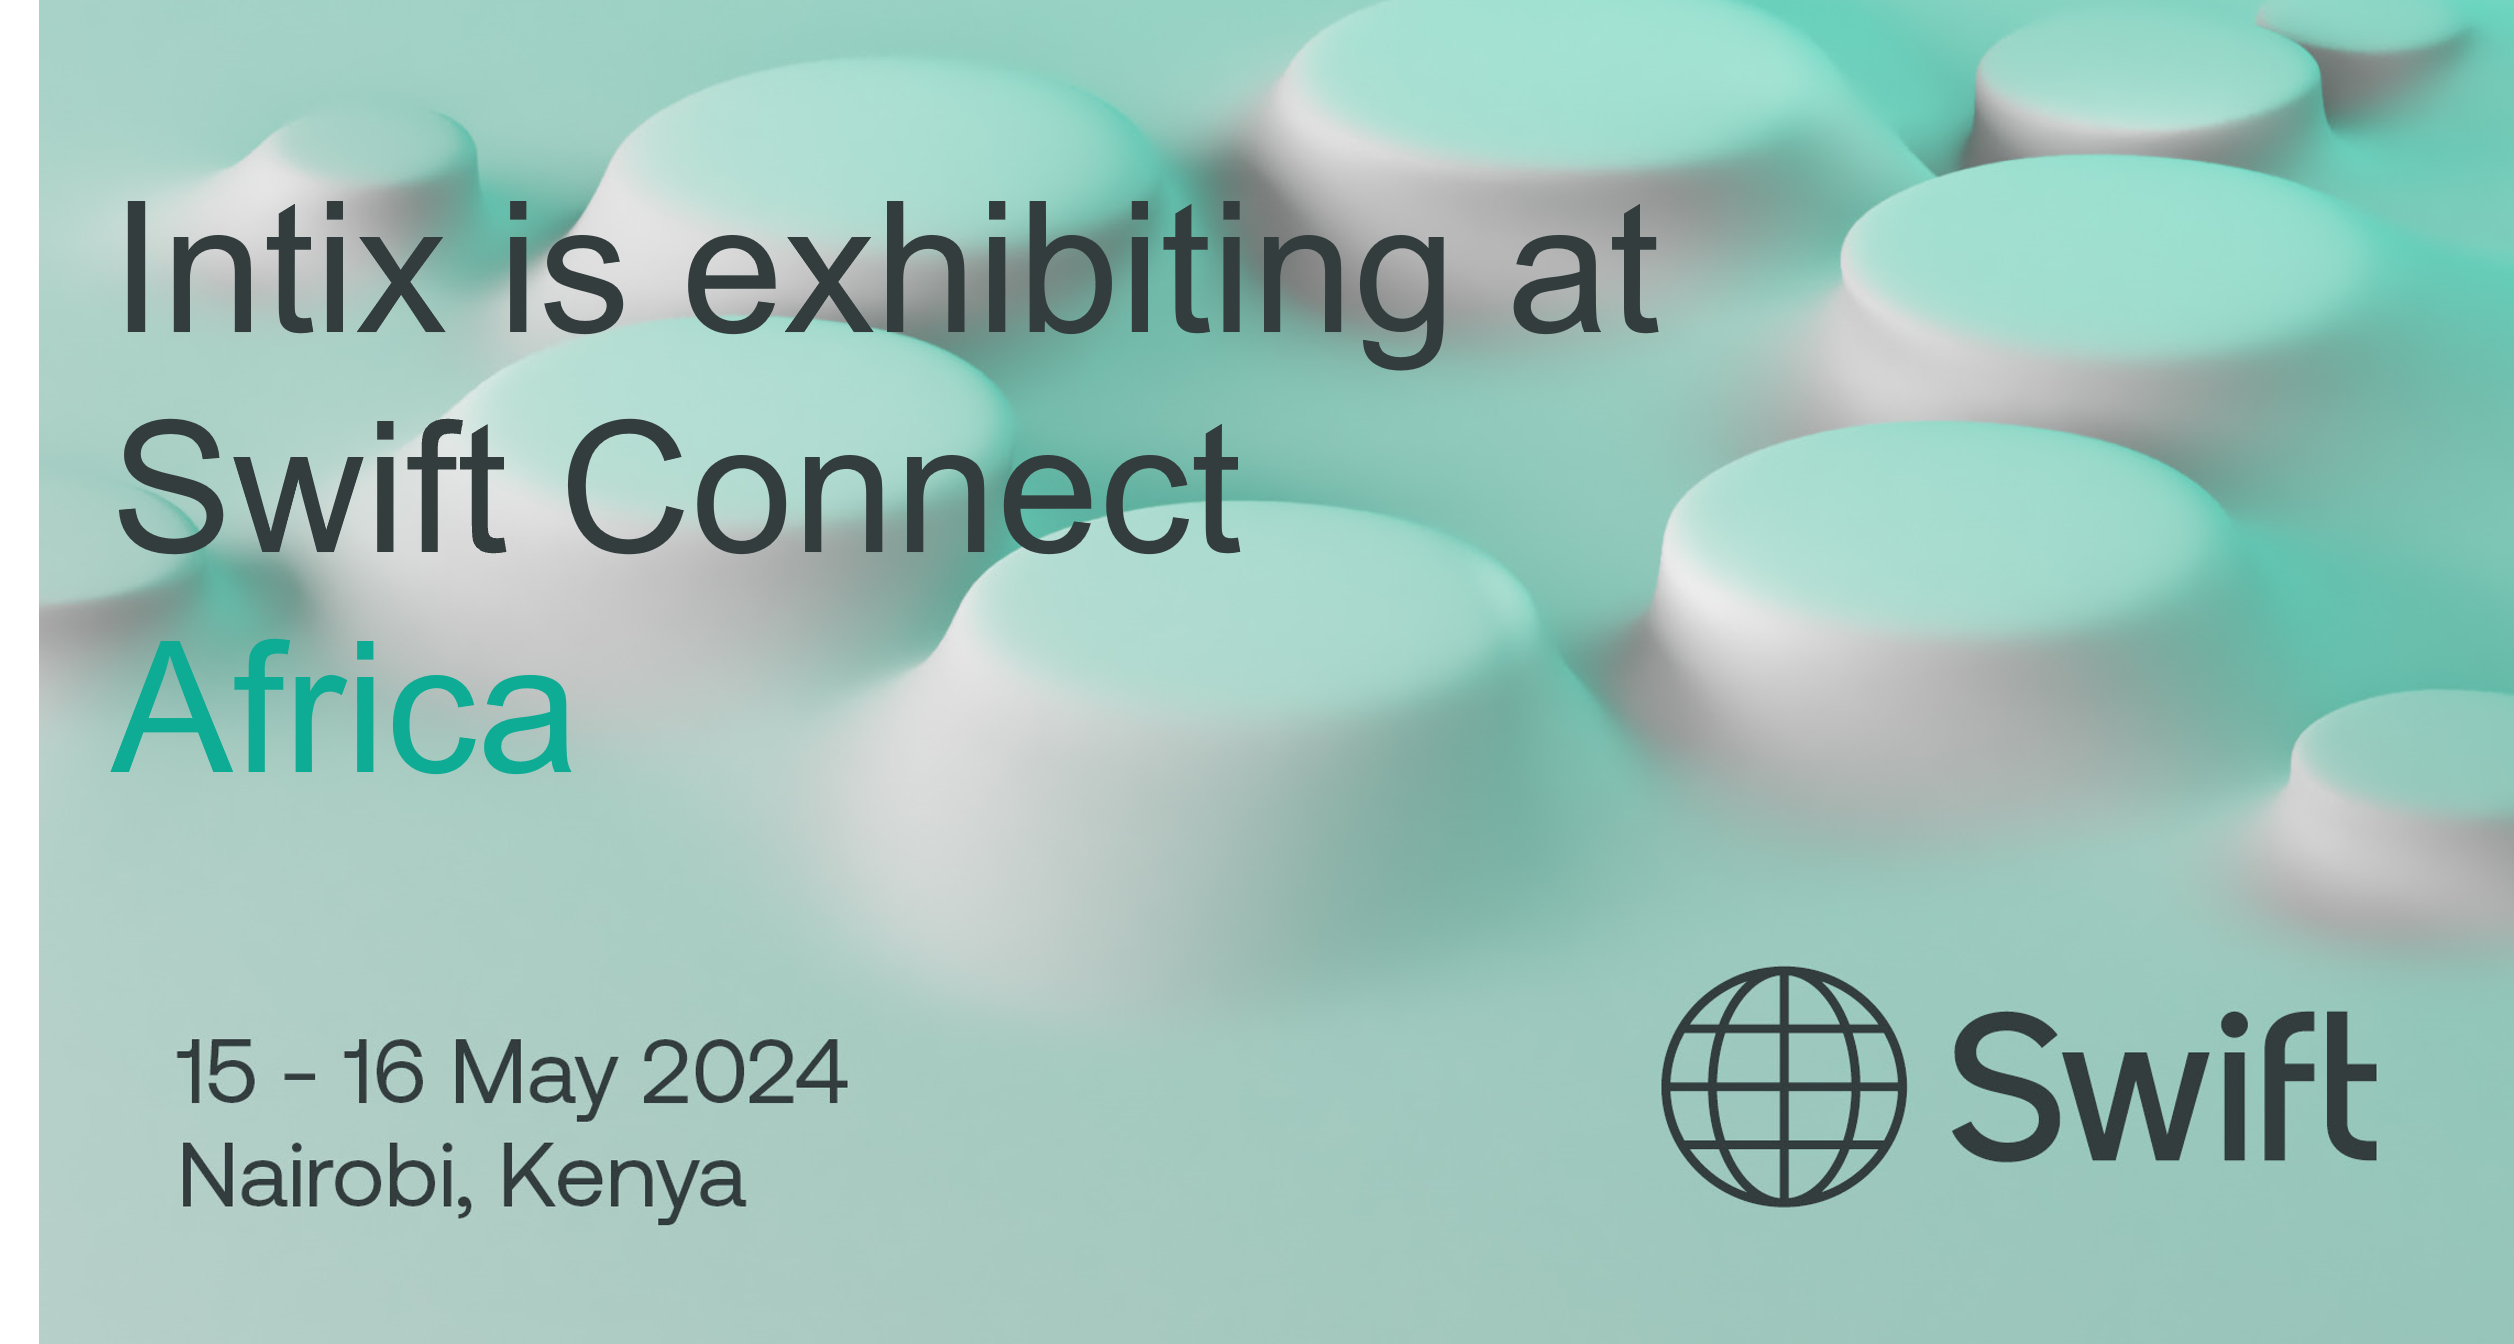 Promotional graphic for intix at swift connect africa event, nairobi, kenya, from may 15-16, 2024, featuring sleek design with soft colors and event details.